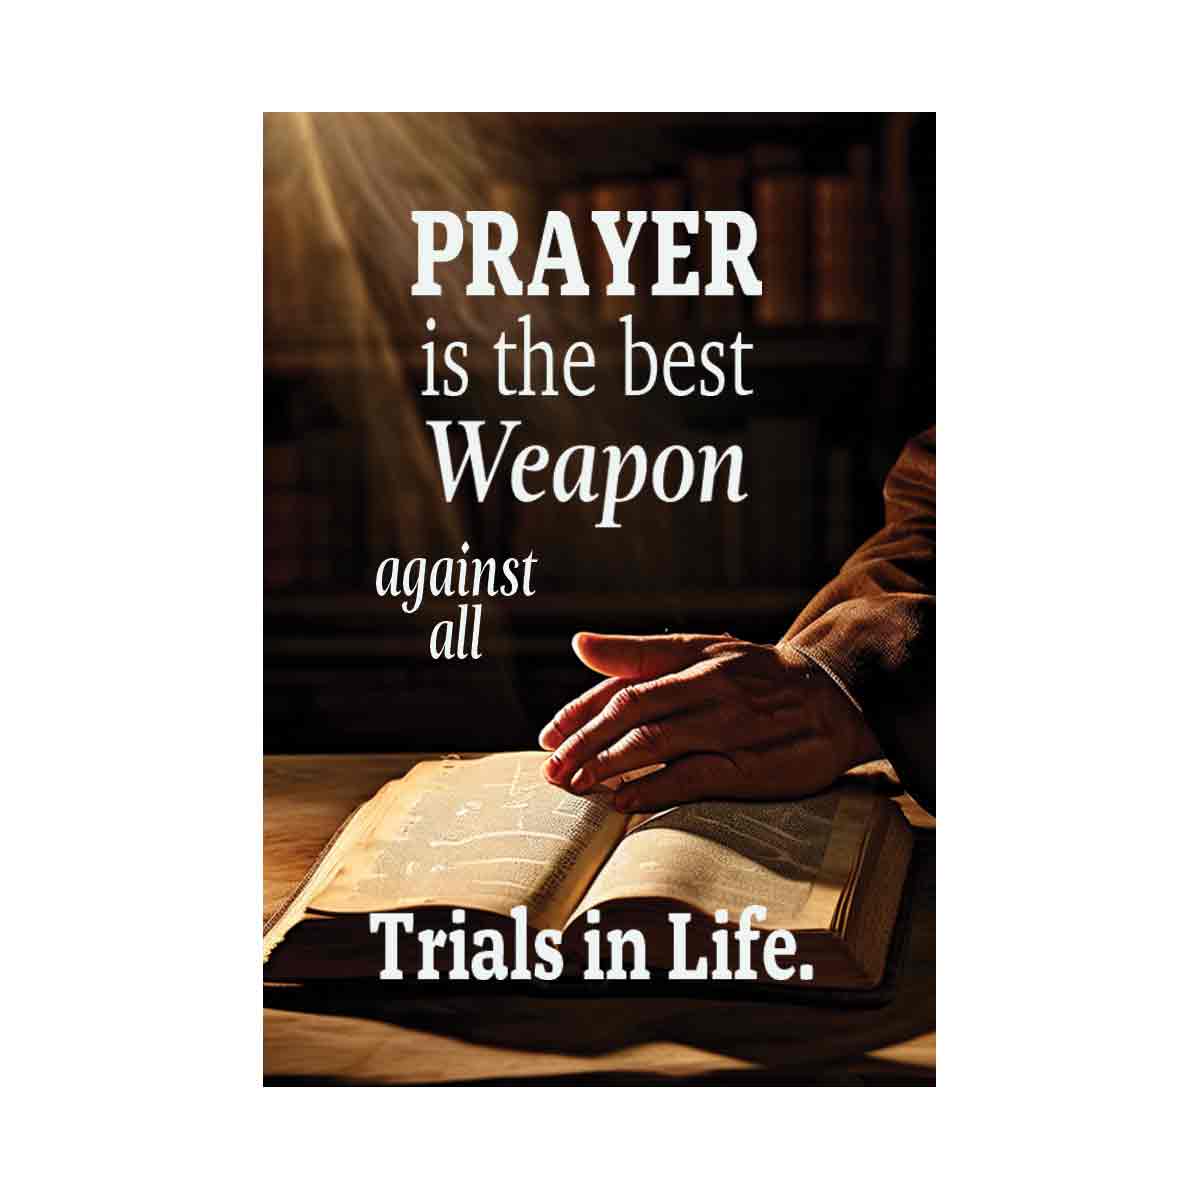 Prayer is the best weapon